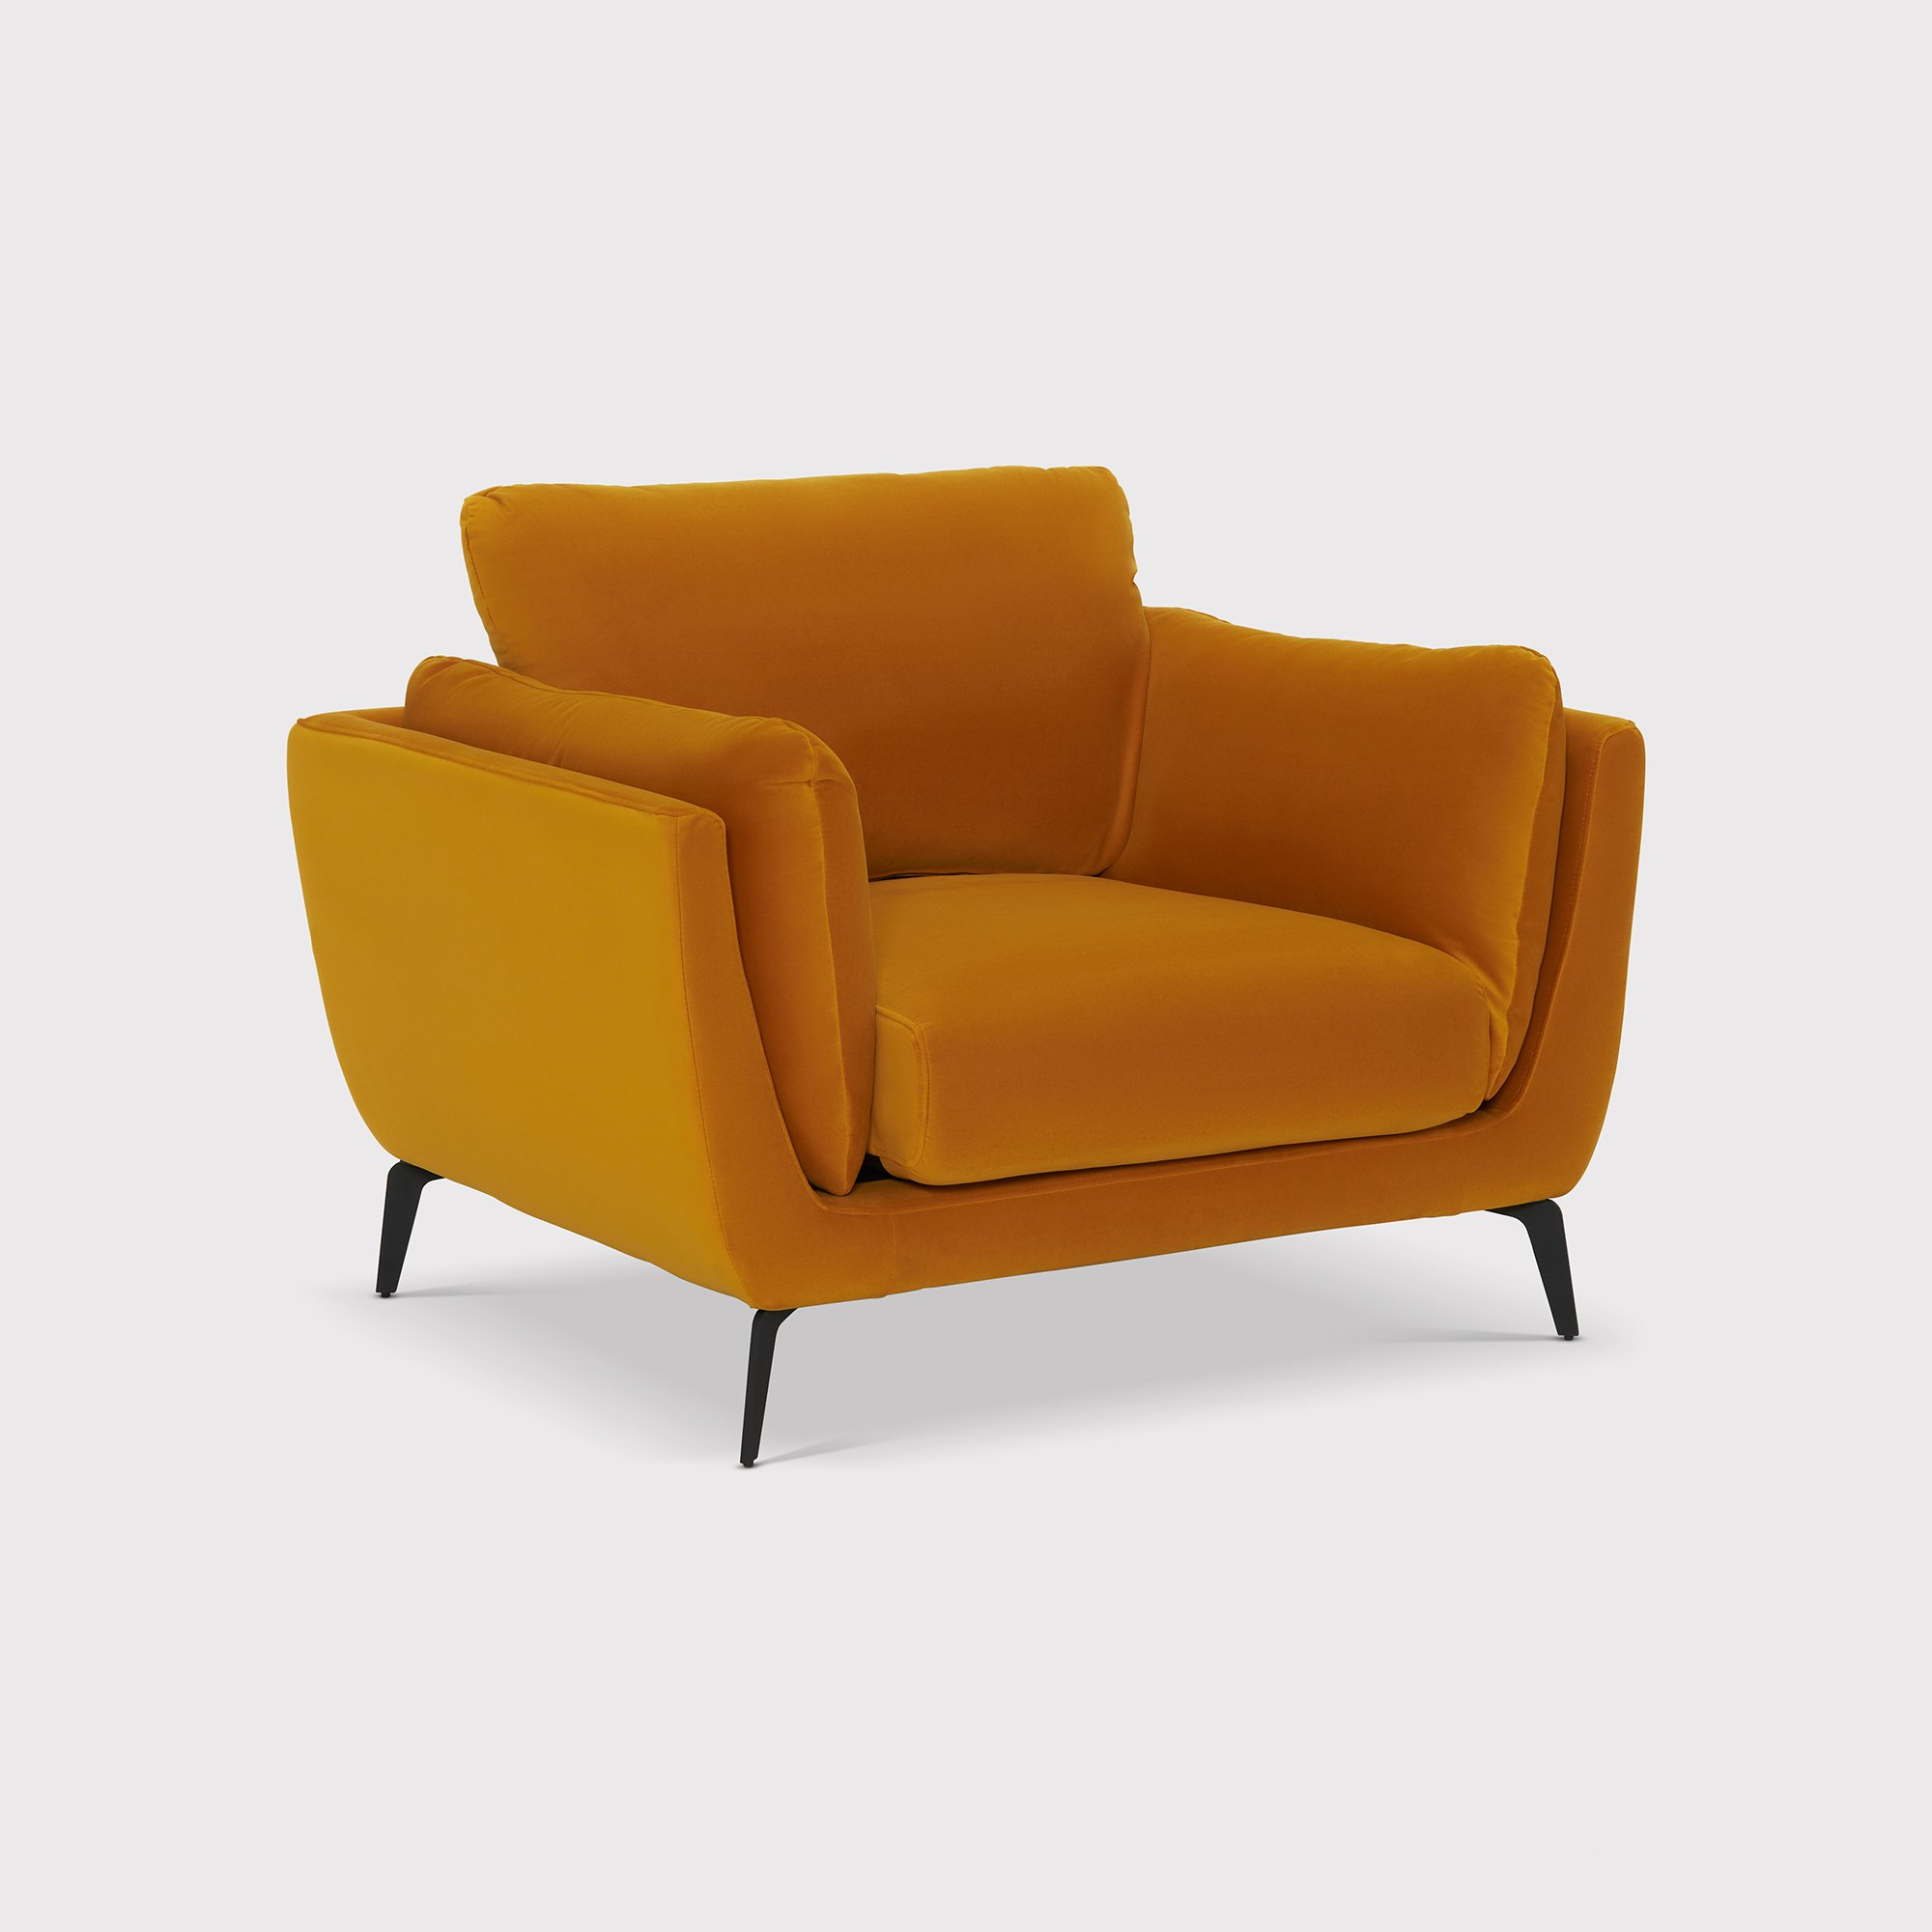 Boone Armchair, Yellow Fabric | Barker & Stonehouse